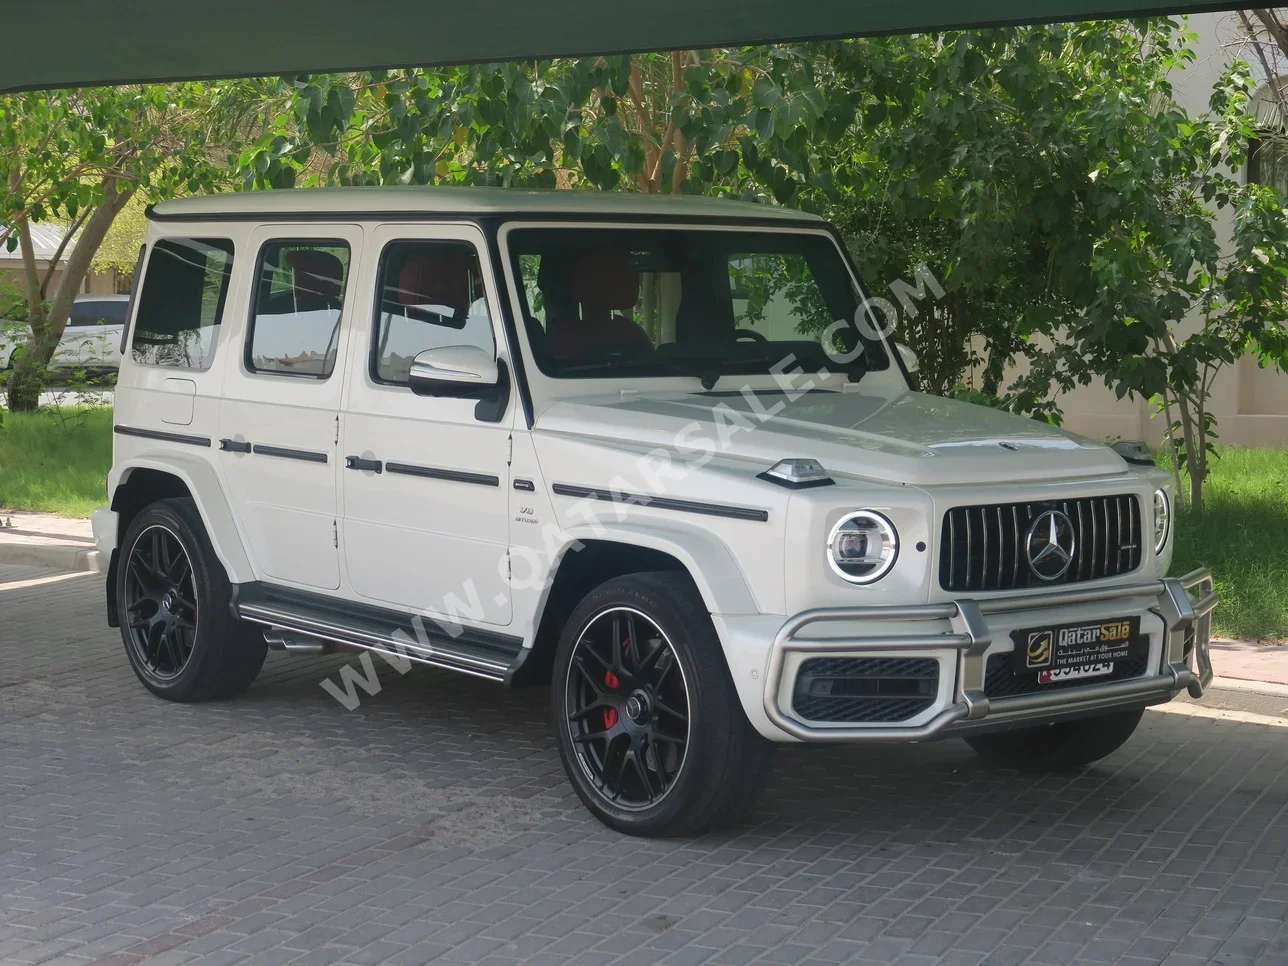 Mercedes-Benz  G-Class  63 AMG  2021  Automatic  34,000 Km  8 Cylinder  Four Wheel Drive (4WD)  SUV  White  With Warranty